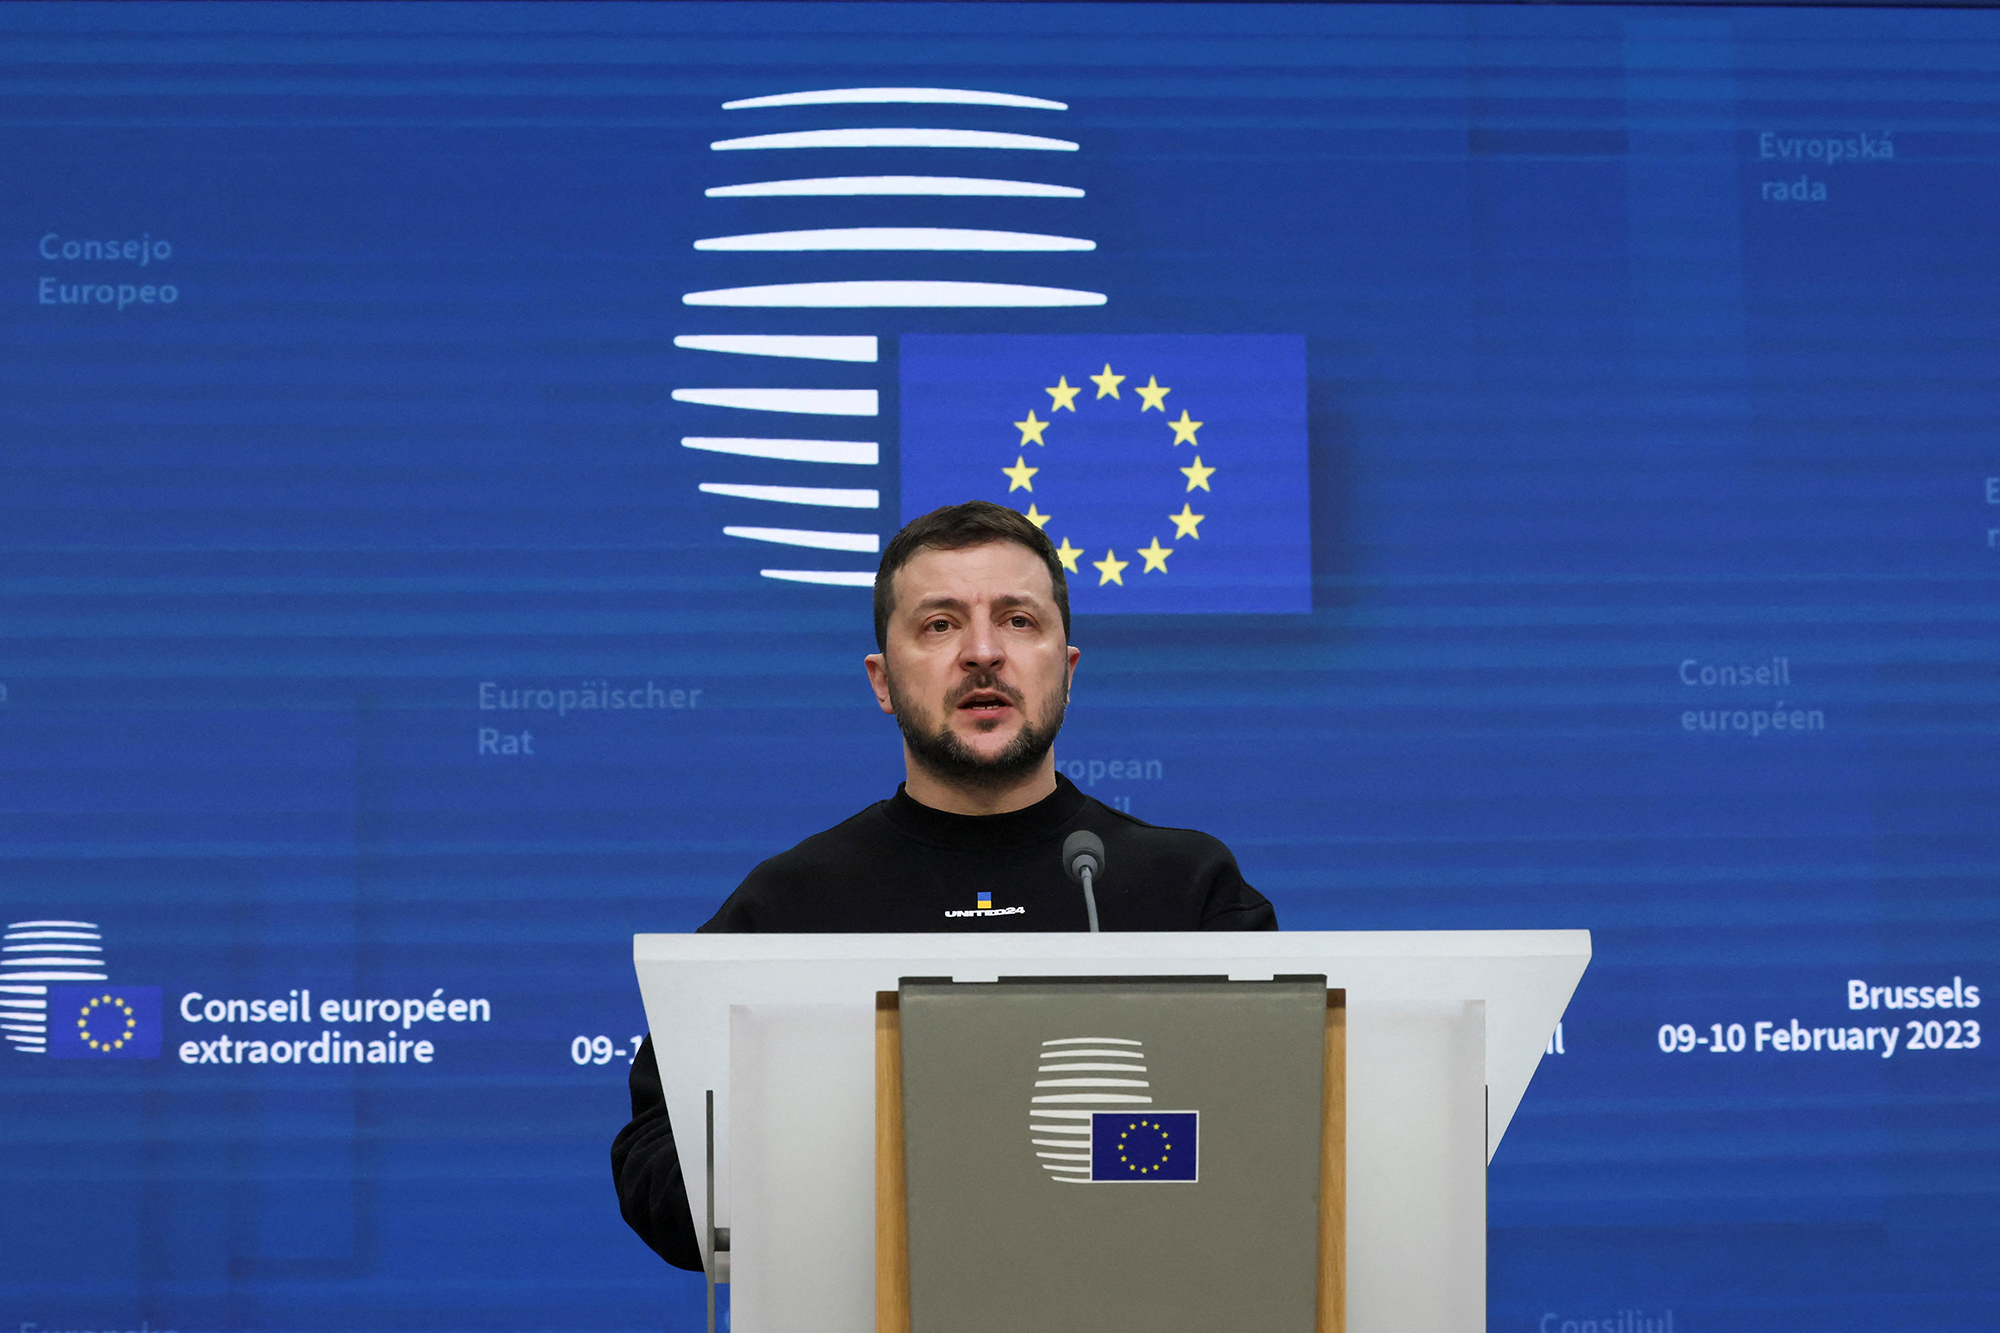 Ukrainian President Volodymyr Zelensky attends a news conference during the European leaders summit in Brussels, Belgium, on February 9.